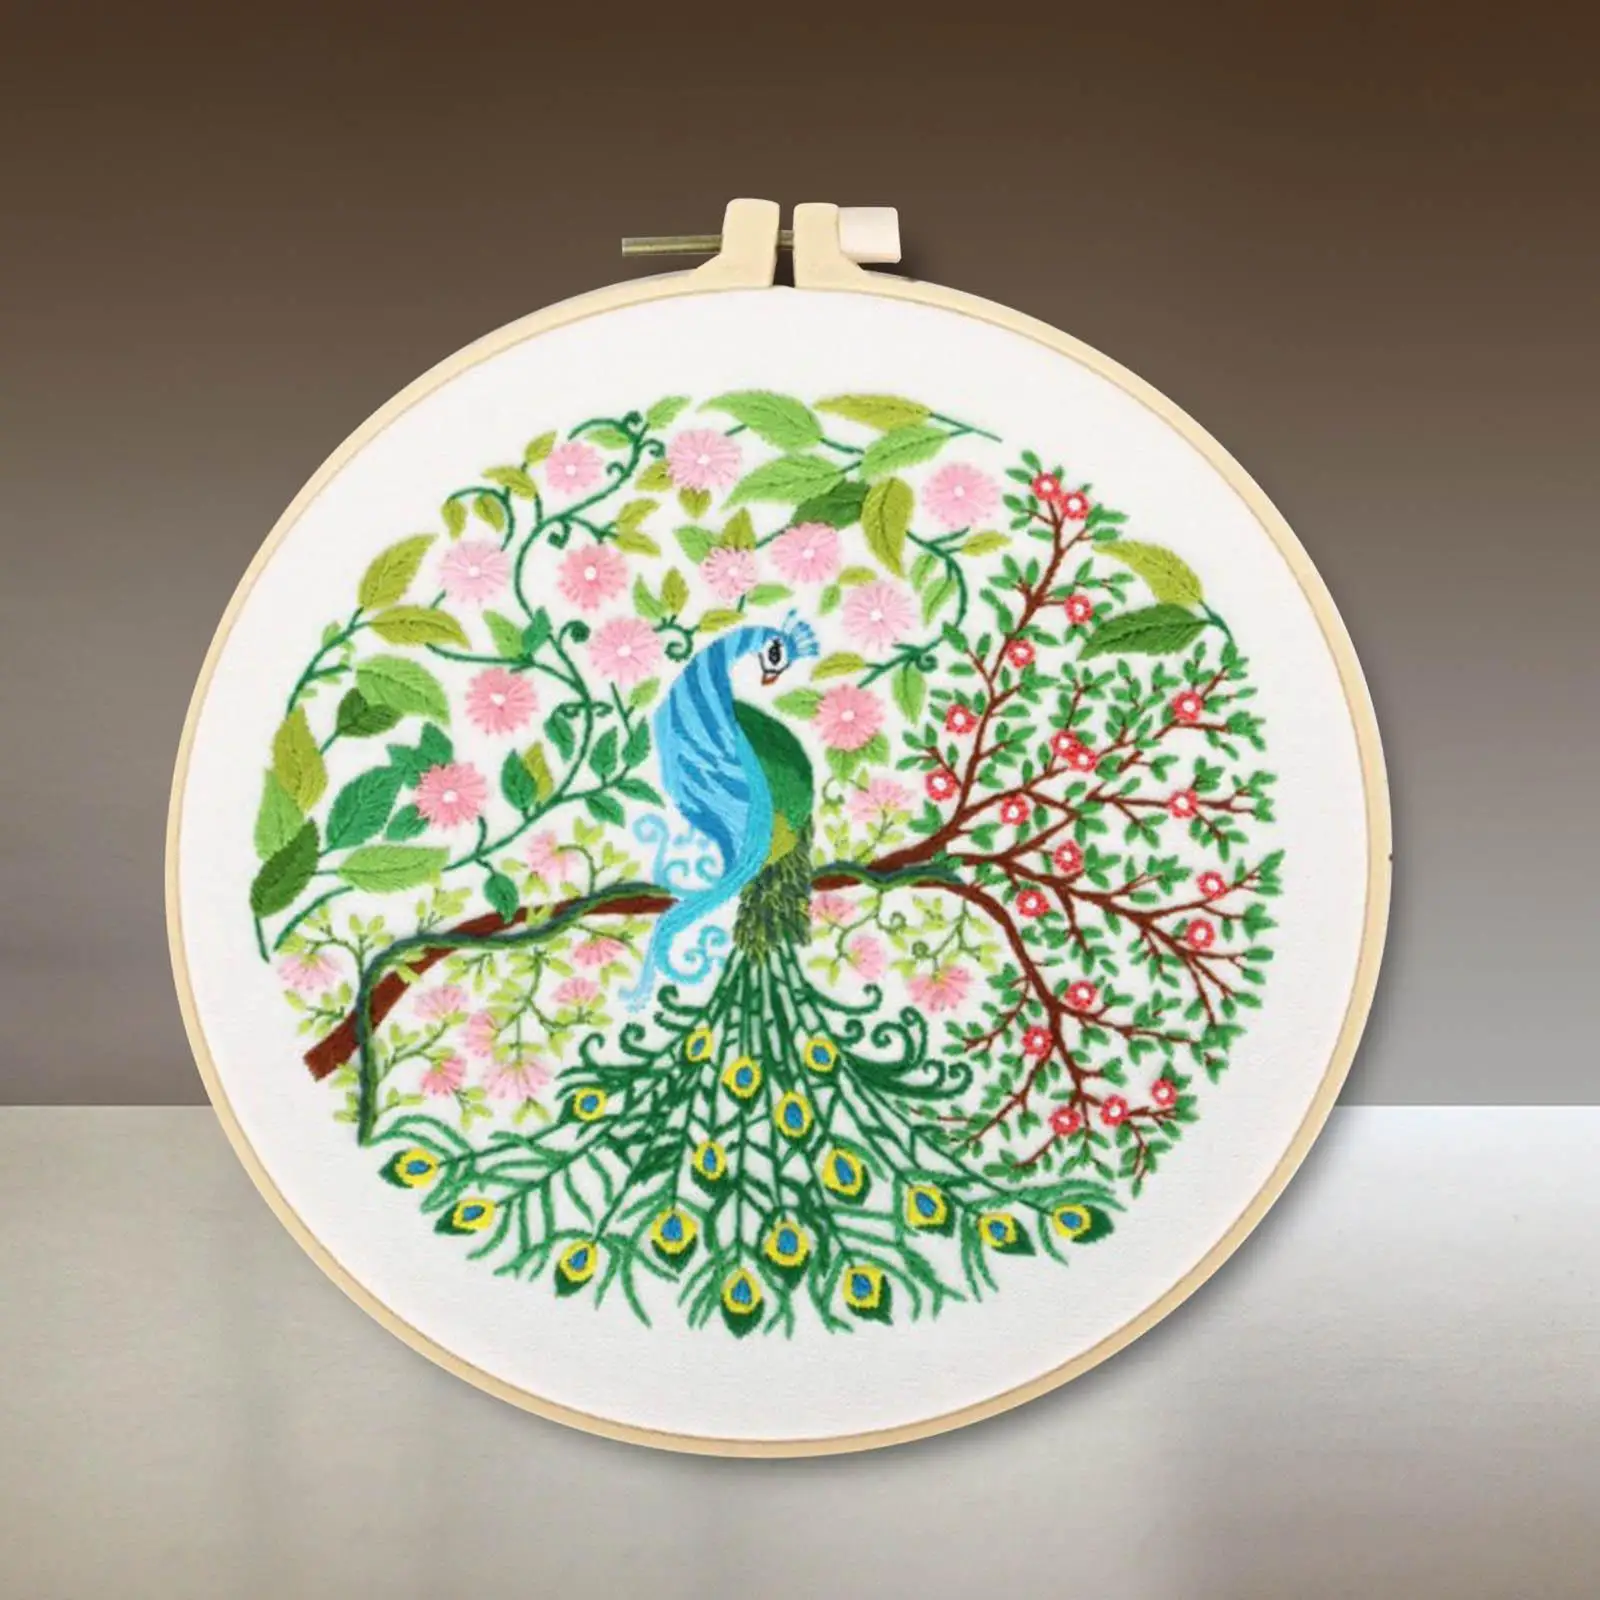 Pre Printed Flower Peacock   Embroidery Kits Sewing Supplies Home Decoration for Beginners Handmade Needlework 